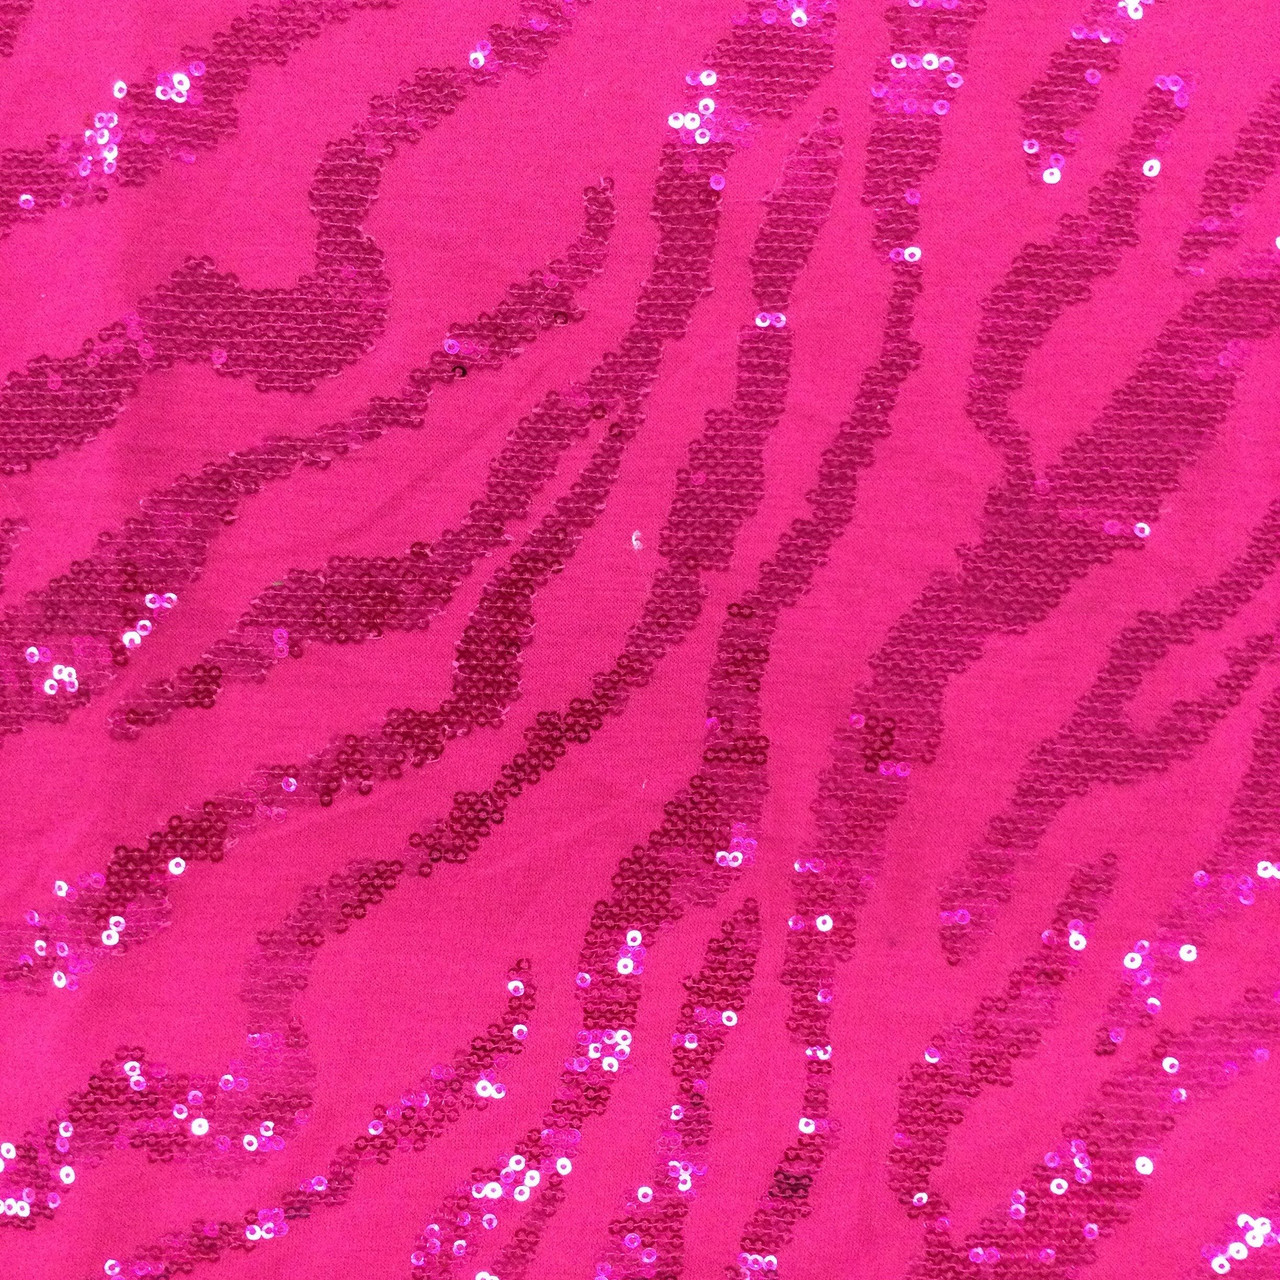 Solid Raspberry Fucshia Stretch Jersey Knit Fabric, Sequin Animal Motif, Clothing and Apparel, 60 Inch Wide